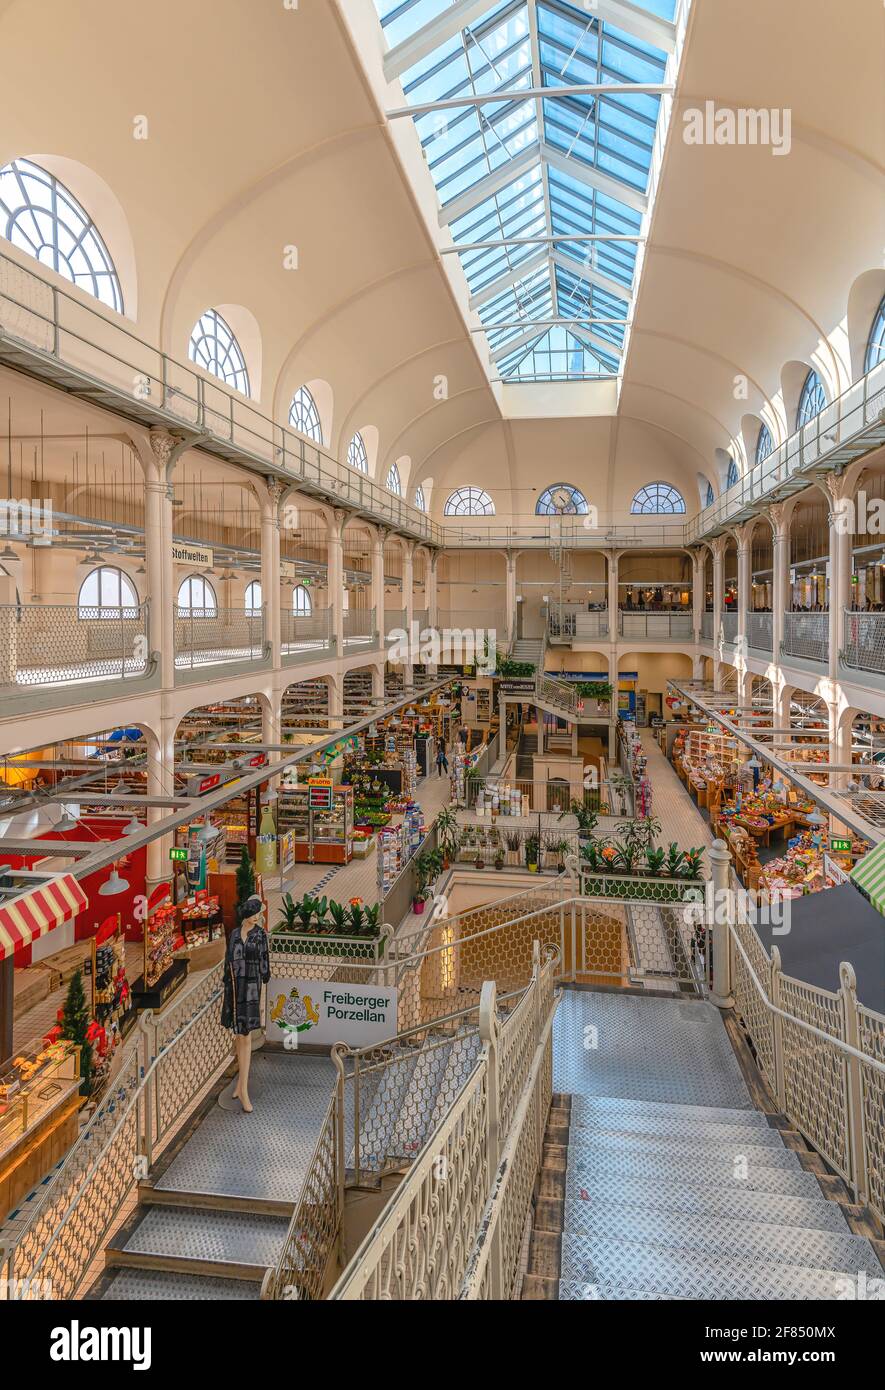 Interior of the Neustaedter Markthalle in Dresden, Saxony, Germany Stock Photo